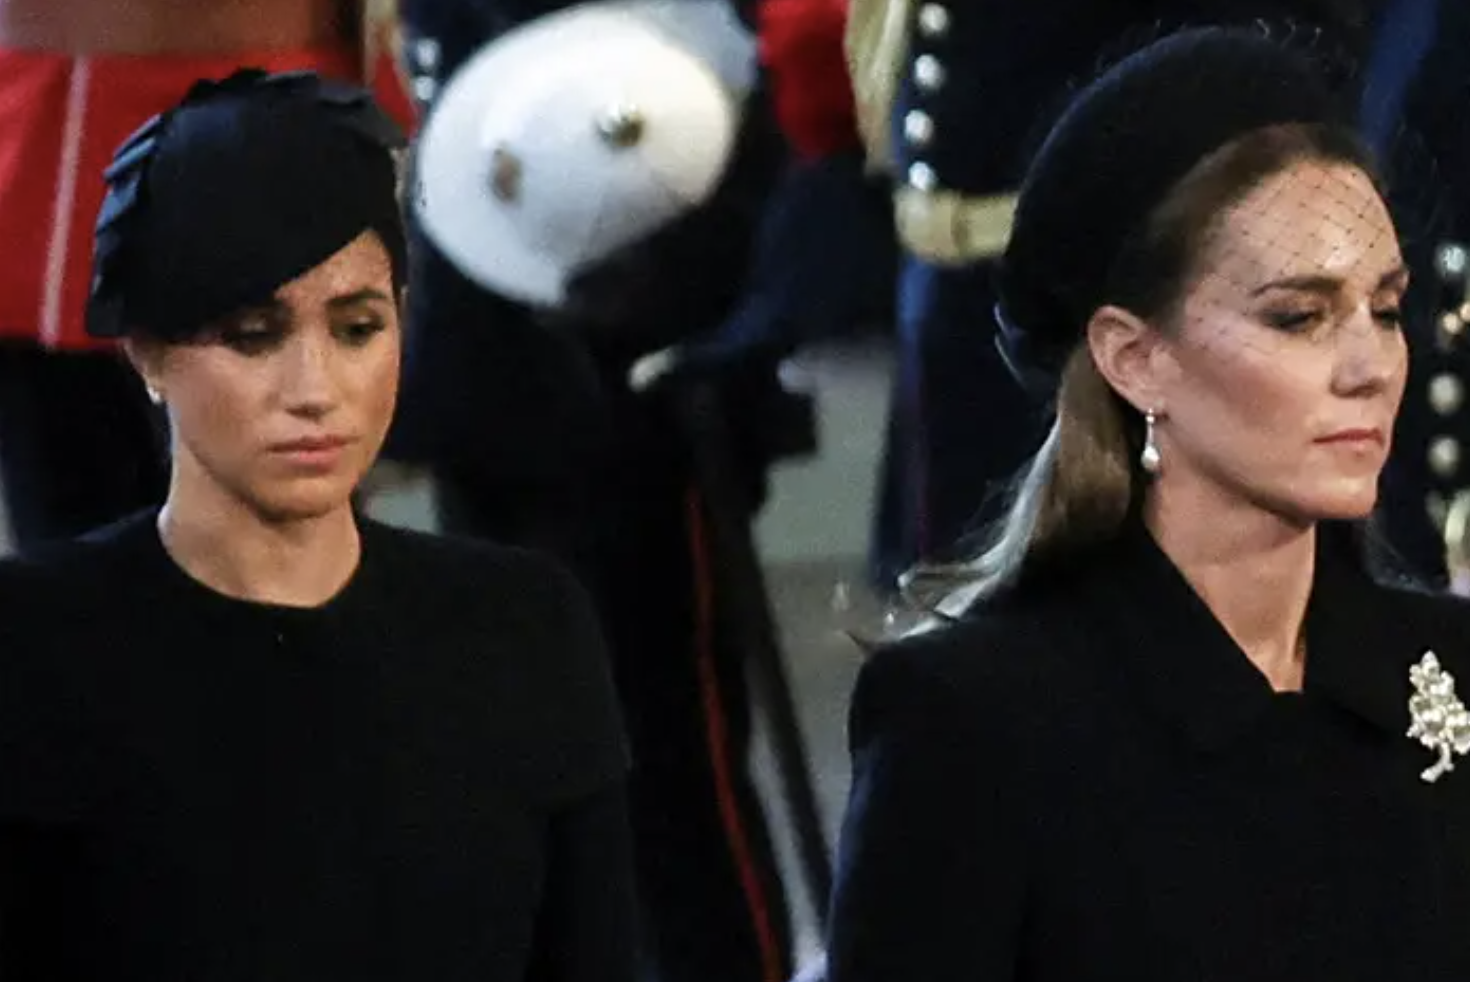 left: meghan markle in a black outfit and cap looking down; right: kate middleton in a black outfit and cap looking down